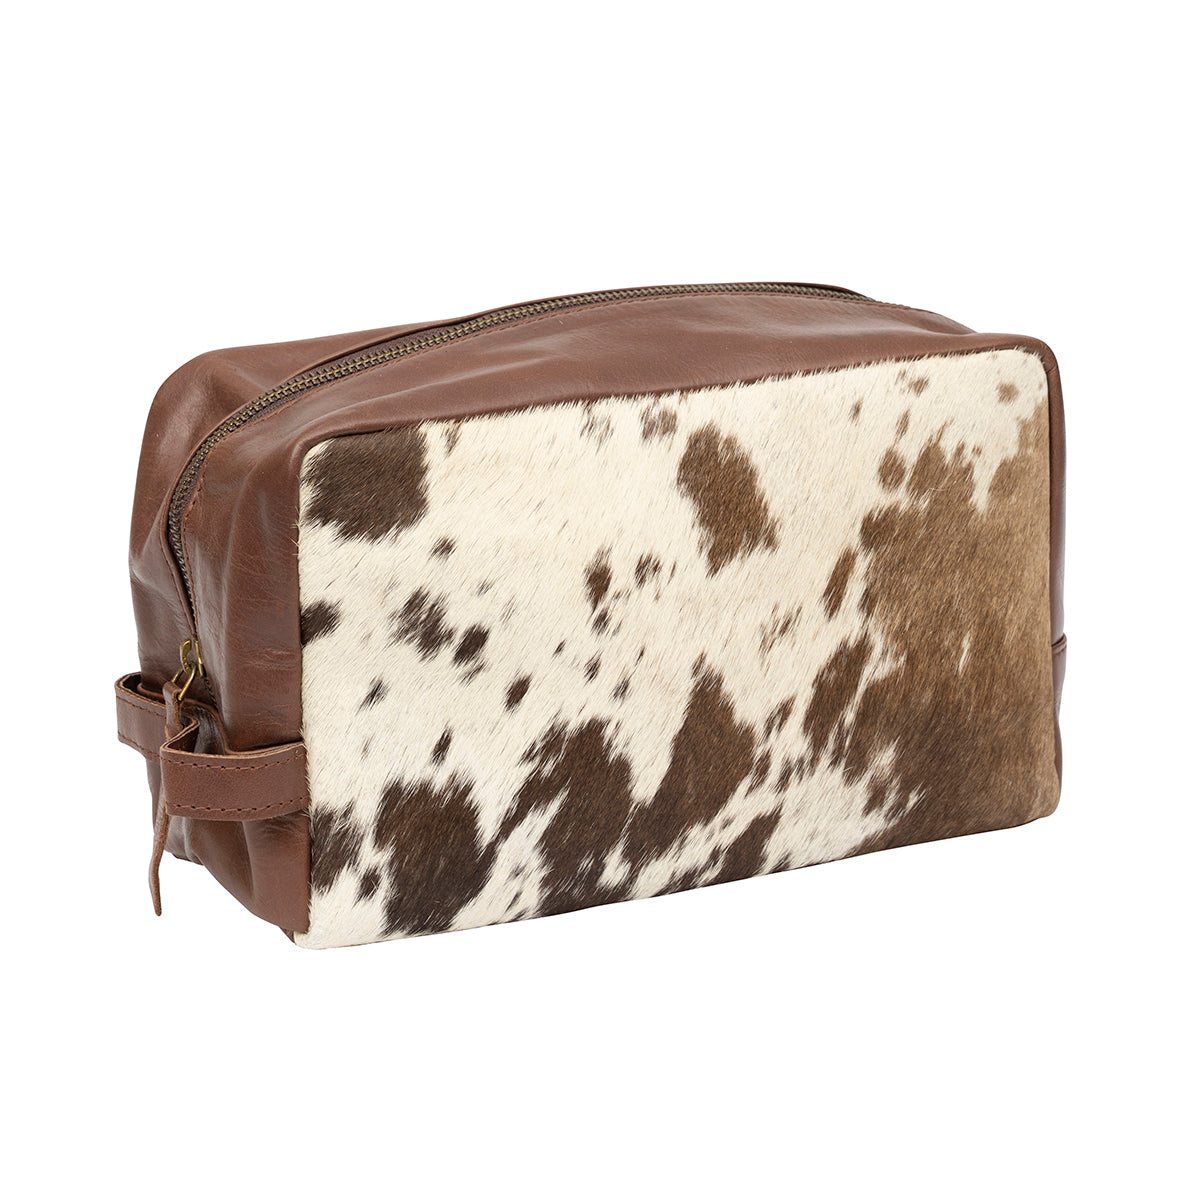 Cow Hide Toiletry Bag Brown & White